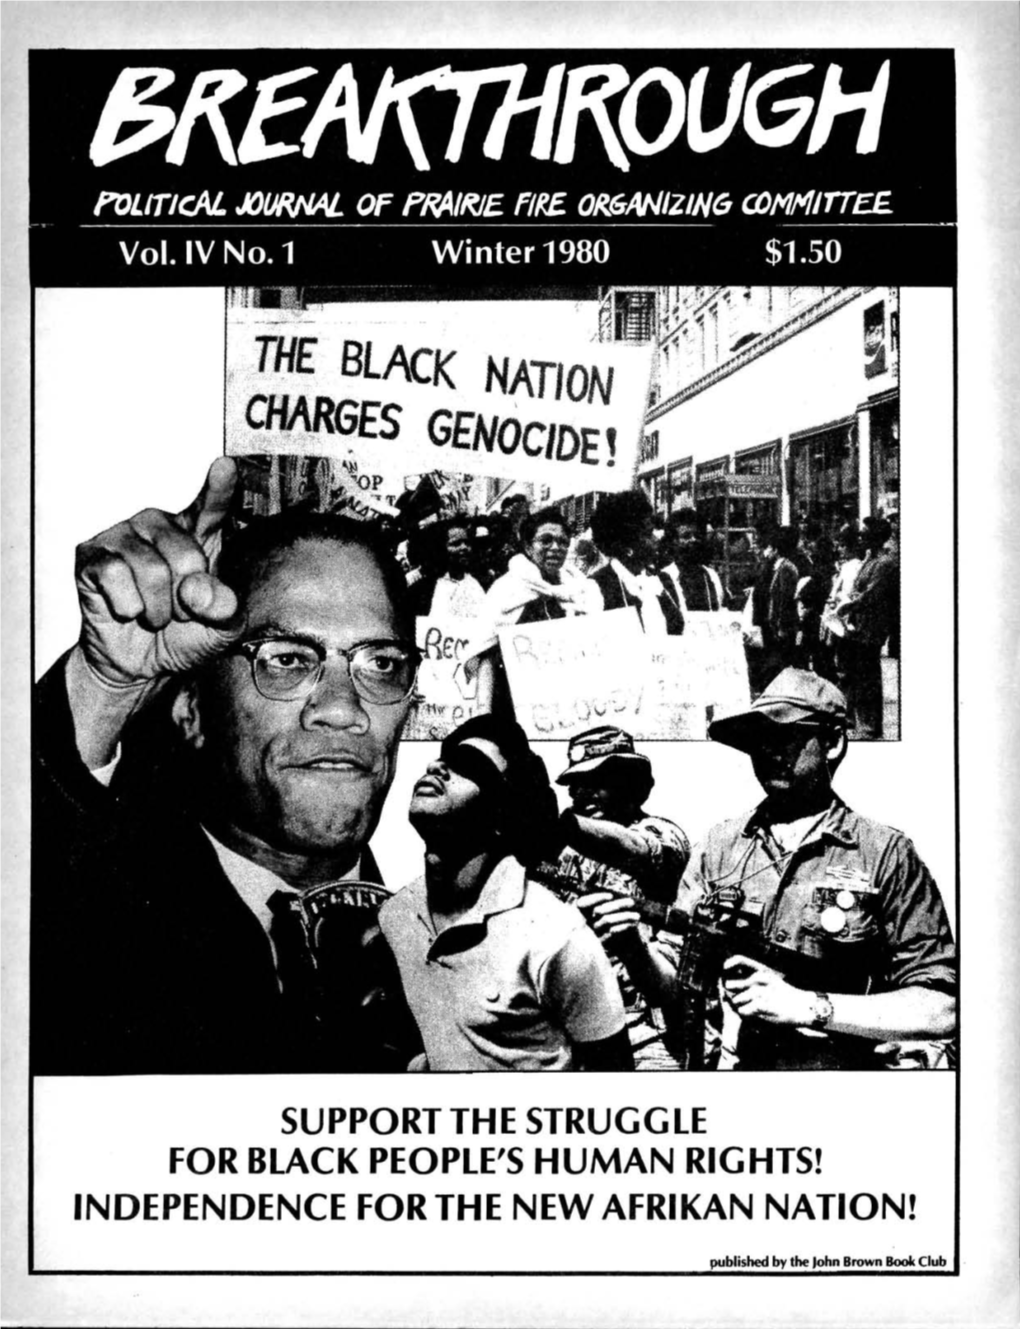 Support the Struggle for Black People's Human Rights! Independence for the New Afrikan Nation!